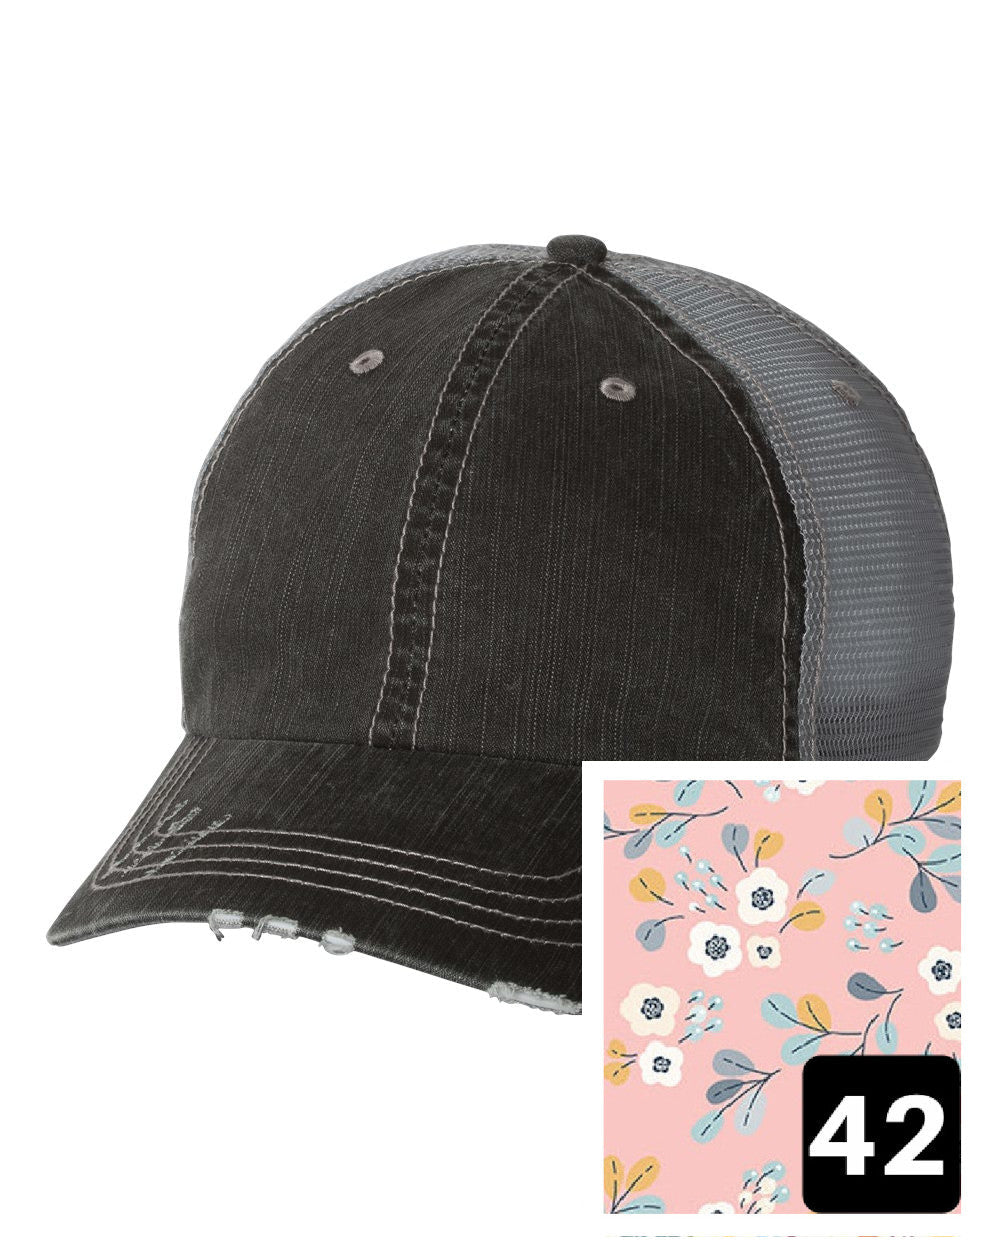 gray distressed trucker hat with light blue and pink mosaic fabric state of Kansas